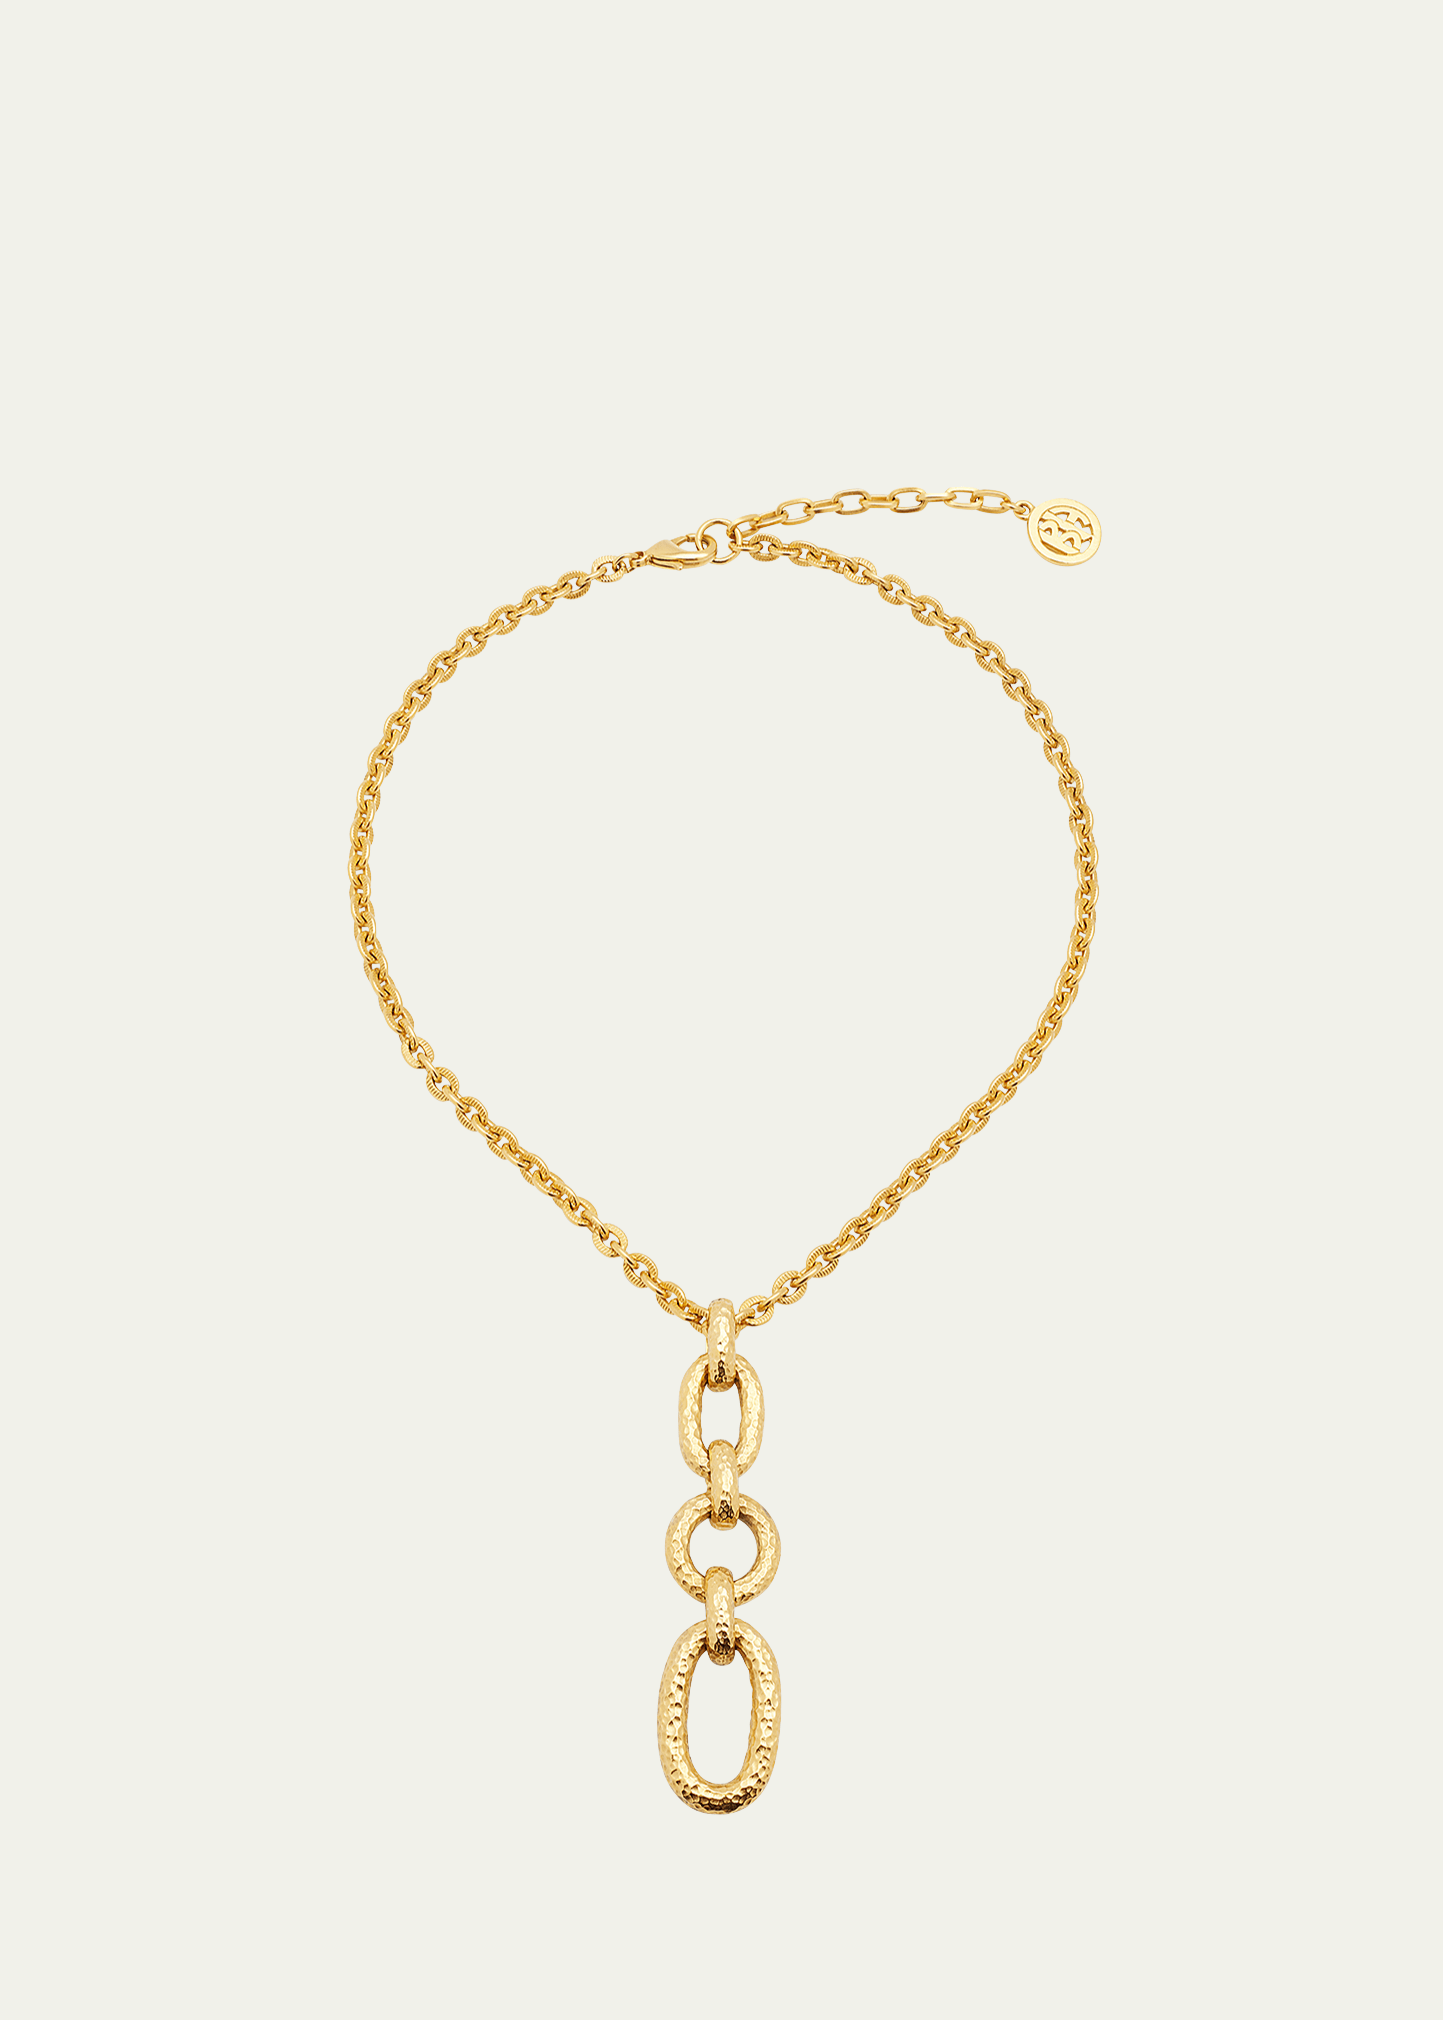 24K Chain Necklace with Hammered Link Pendant